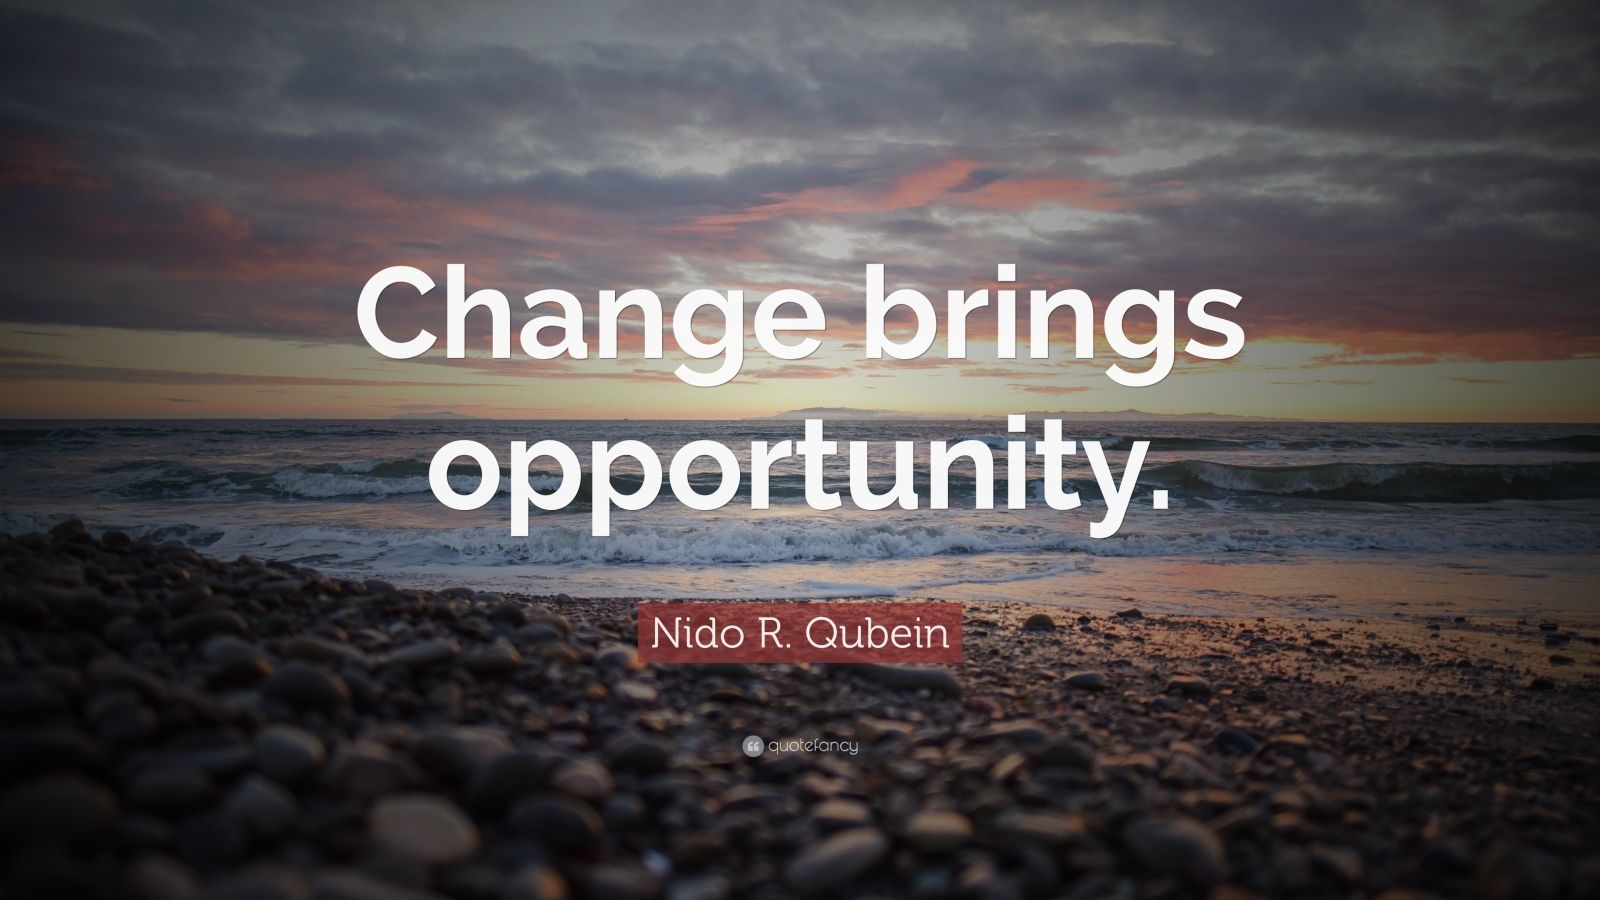 Nido R. Qubein Quote: “Change brings opportunity.” (18 wallpapers